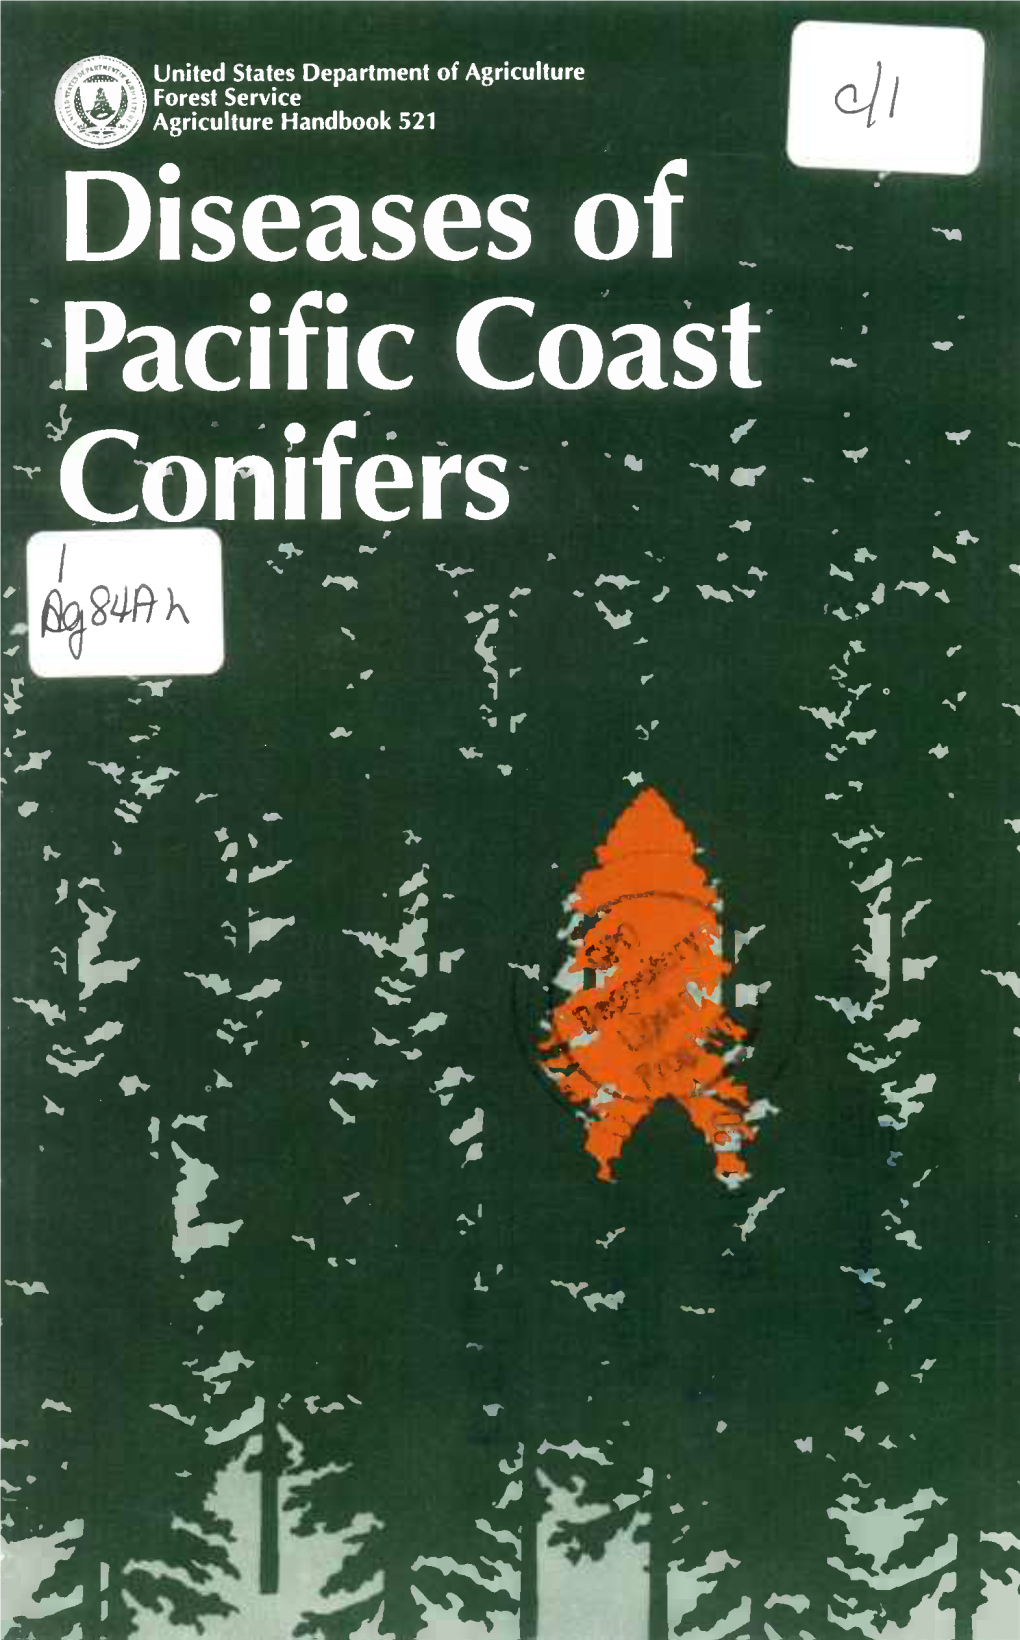 Diseases of Pacific Coast Conifers